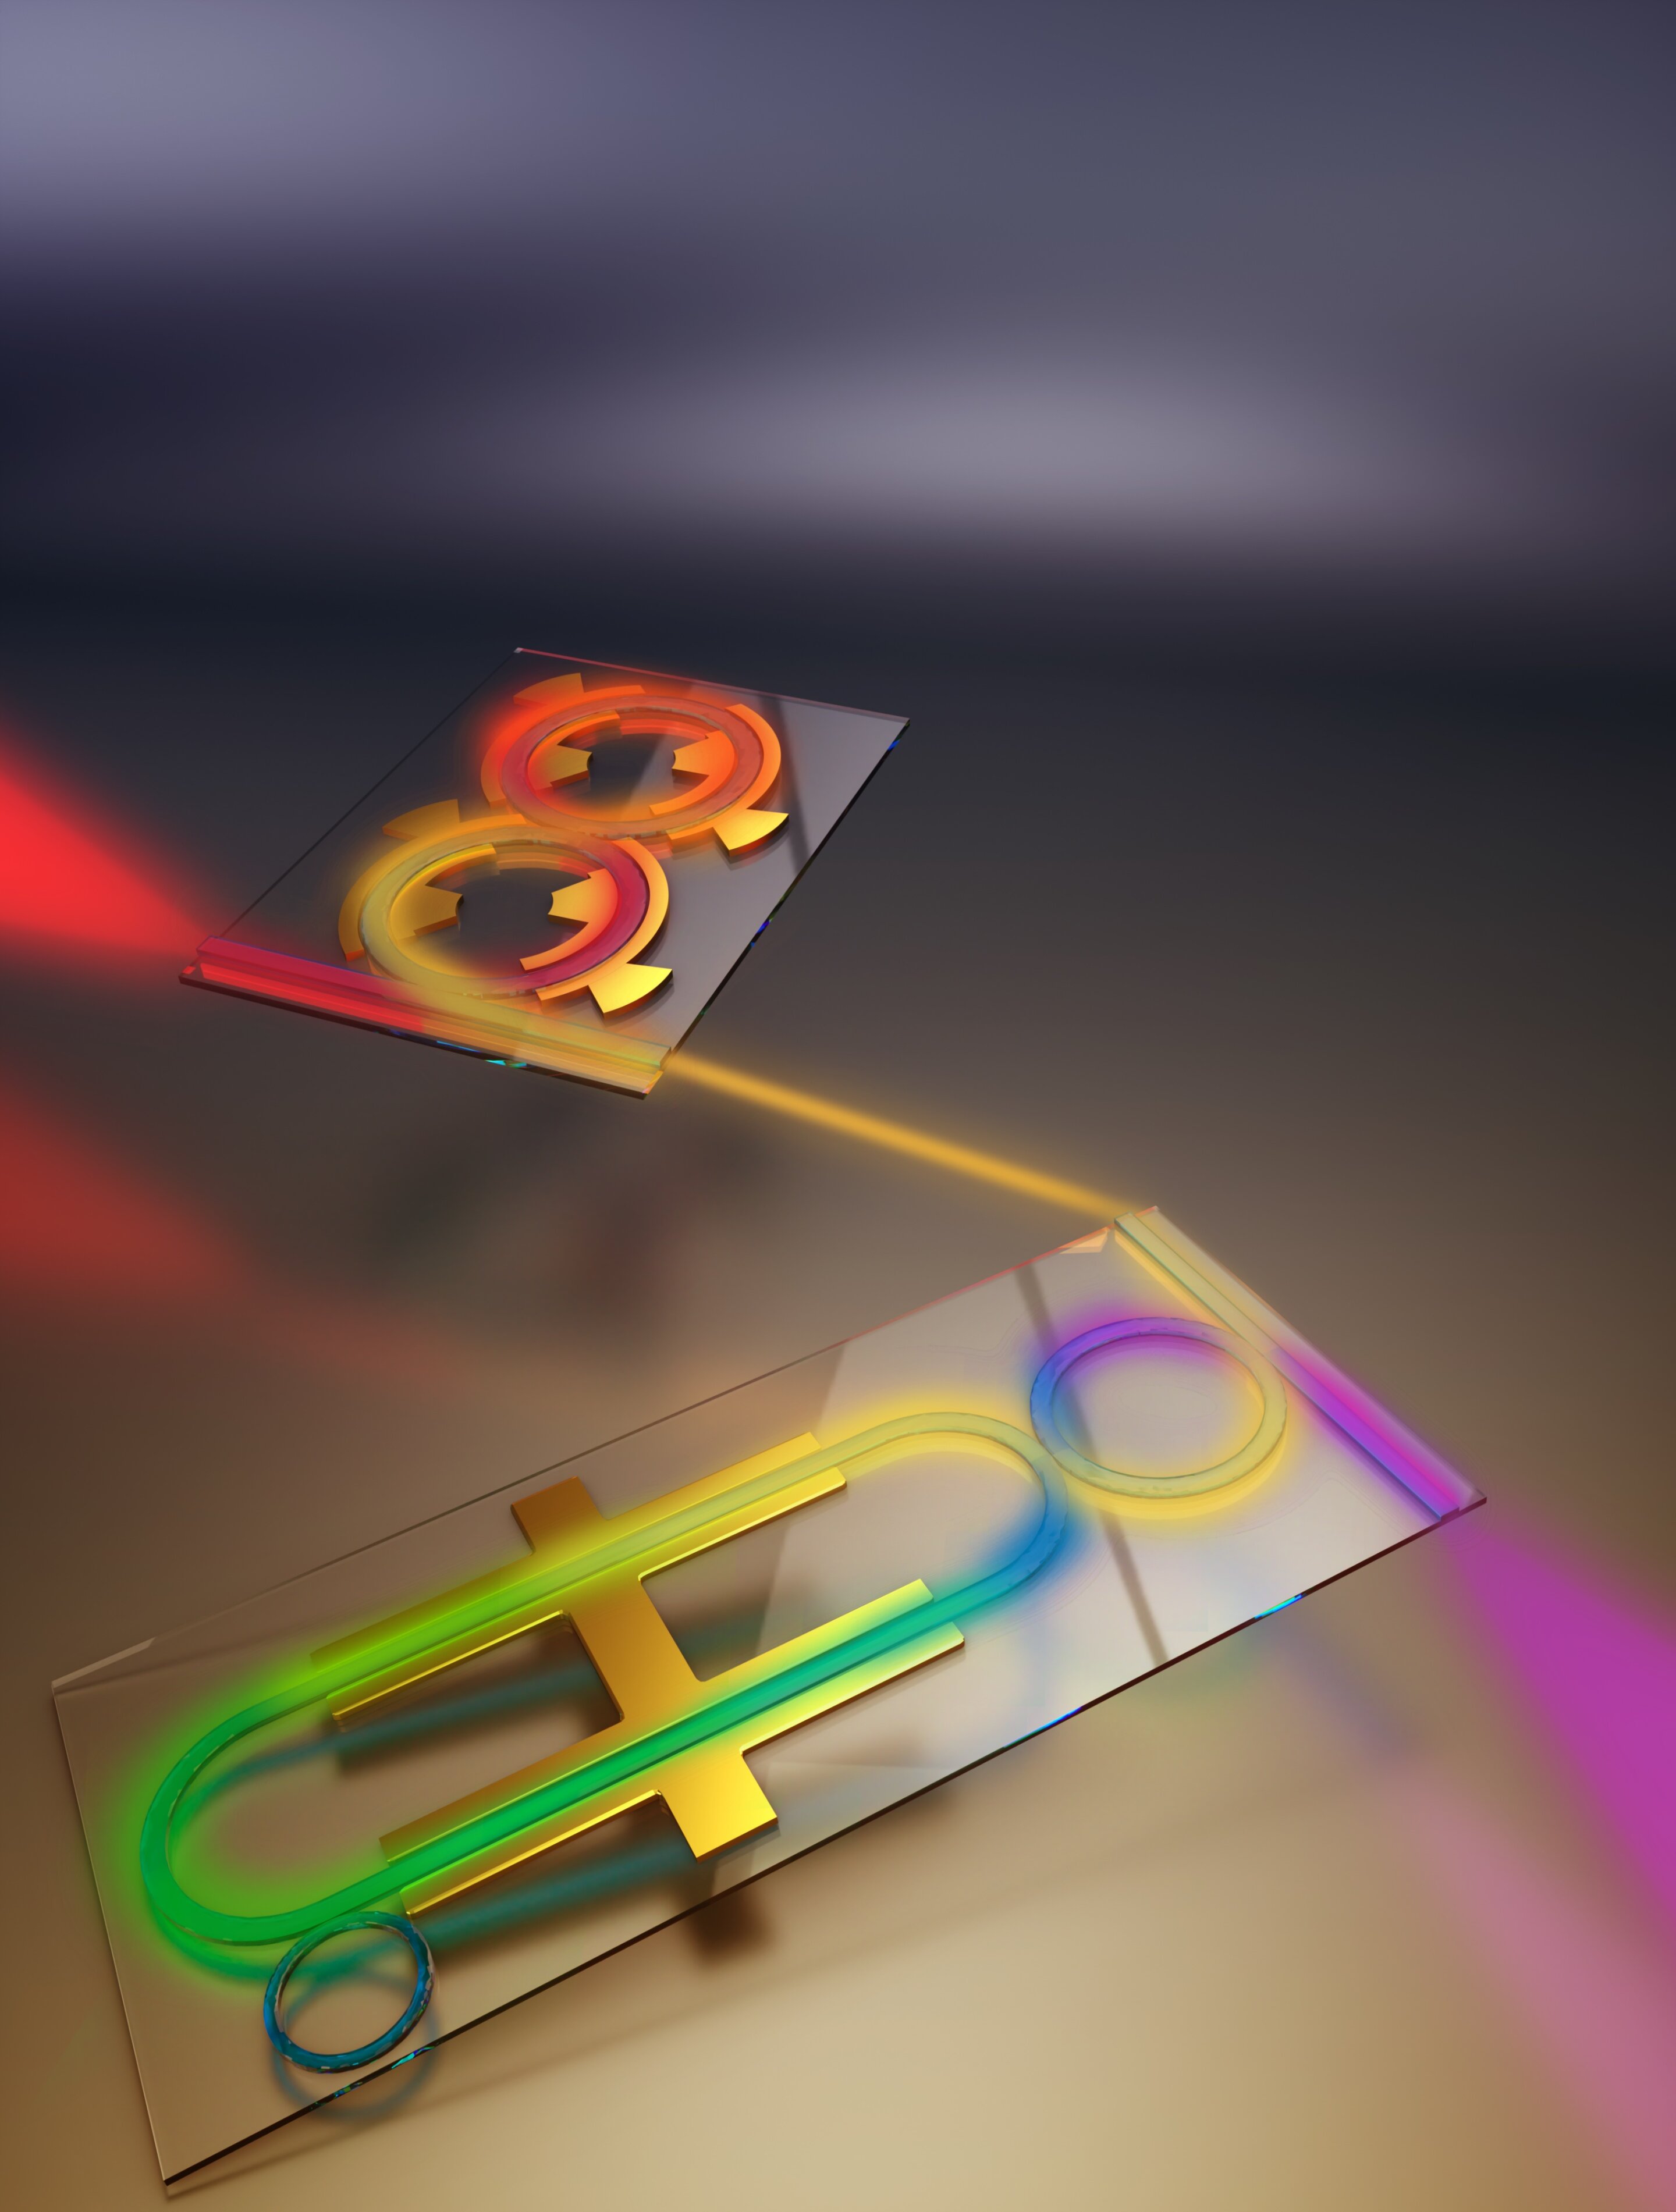 On-chip frequency shifters in the gigahertz range could be used in next generation quantum computers and networks